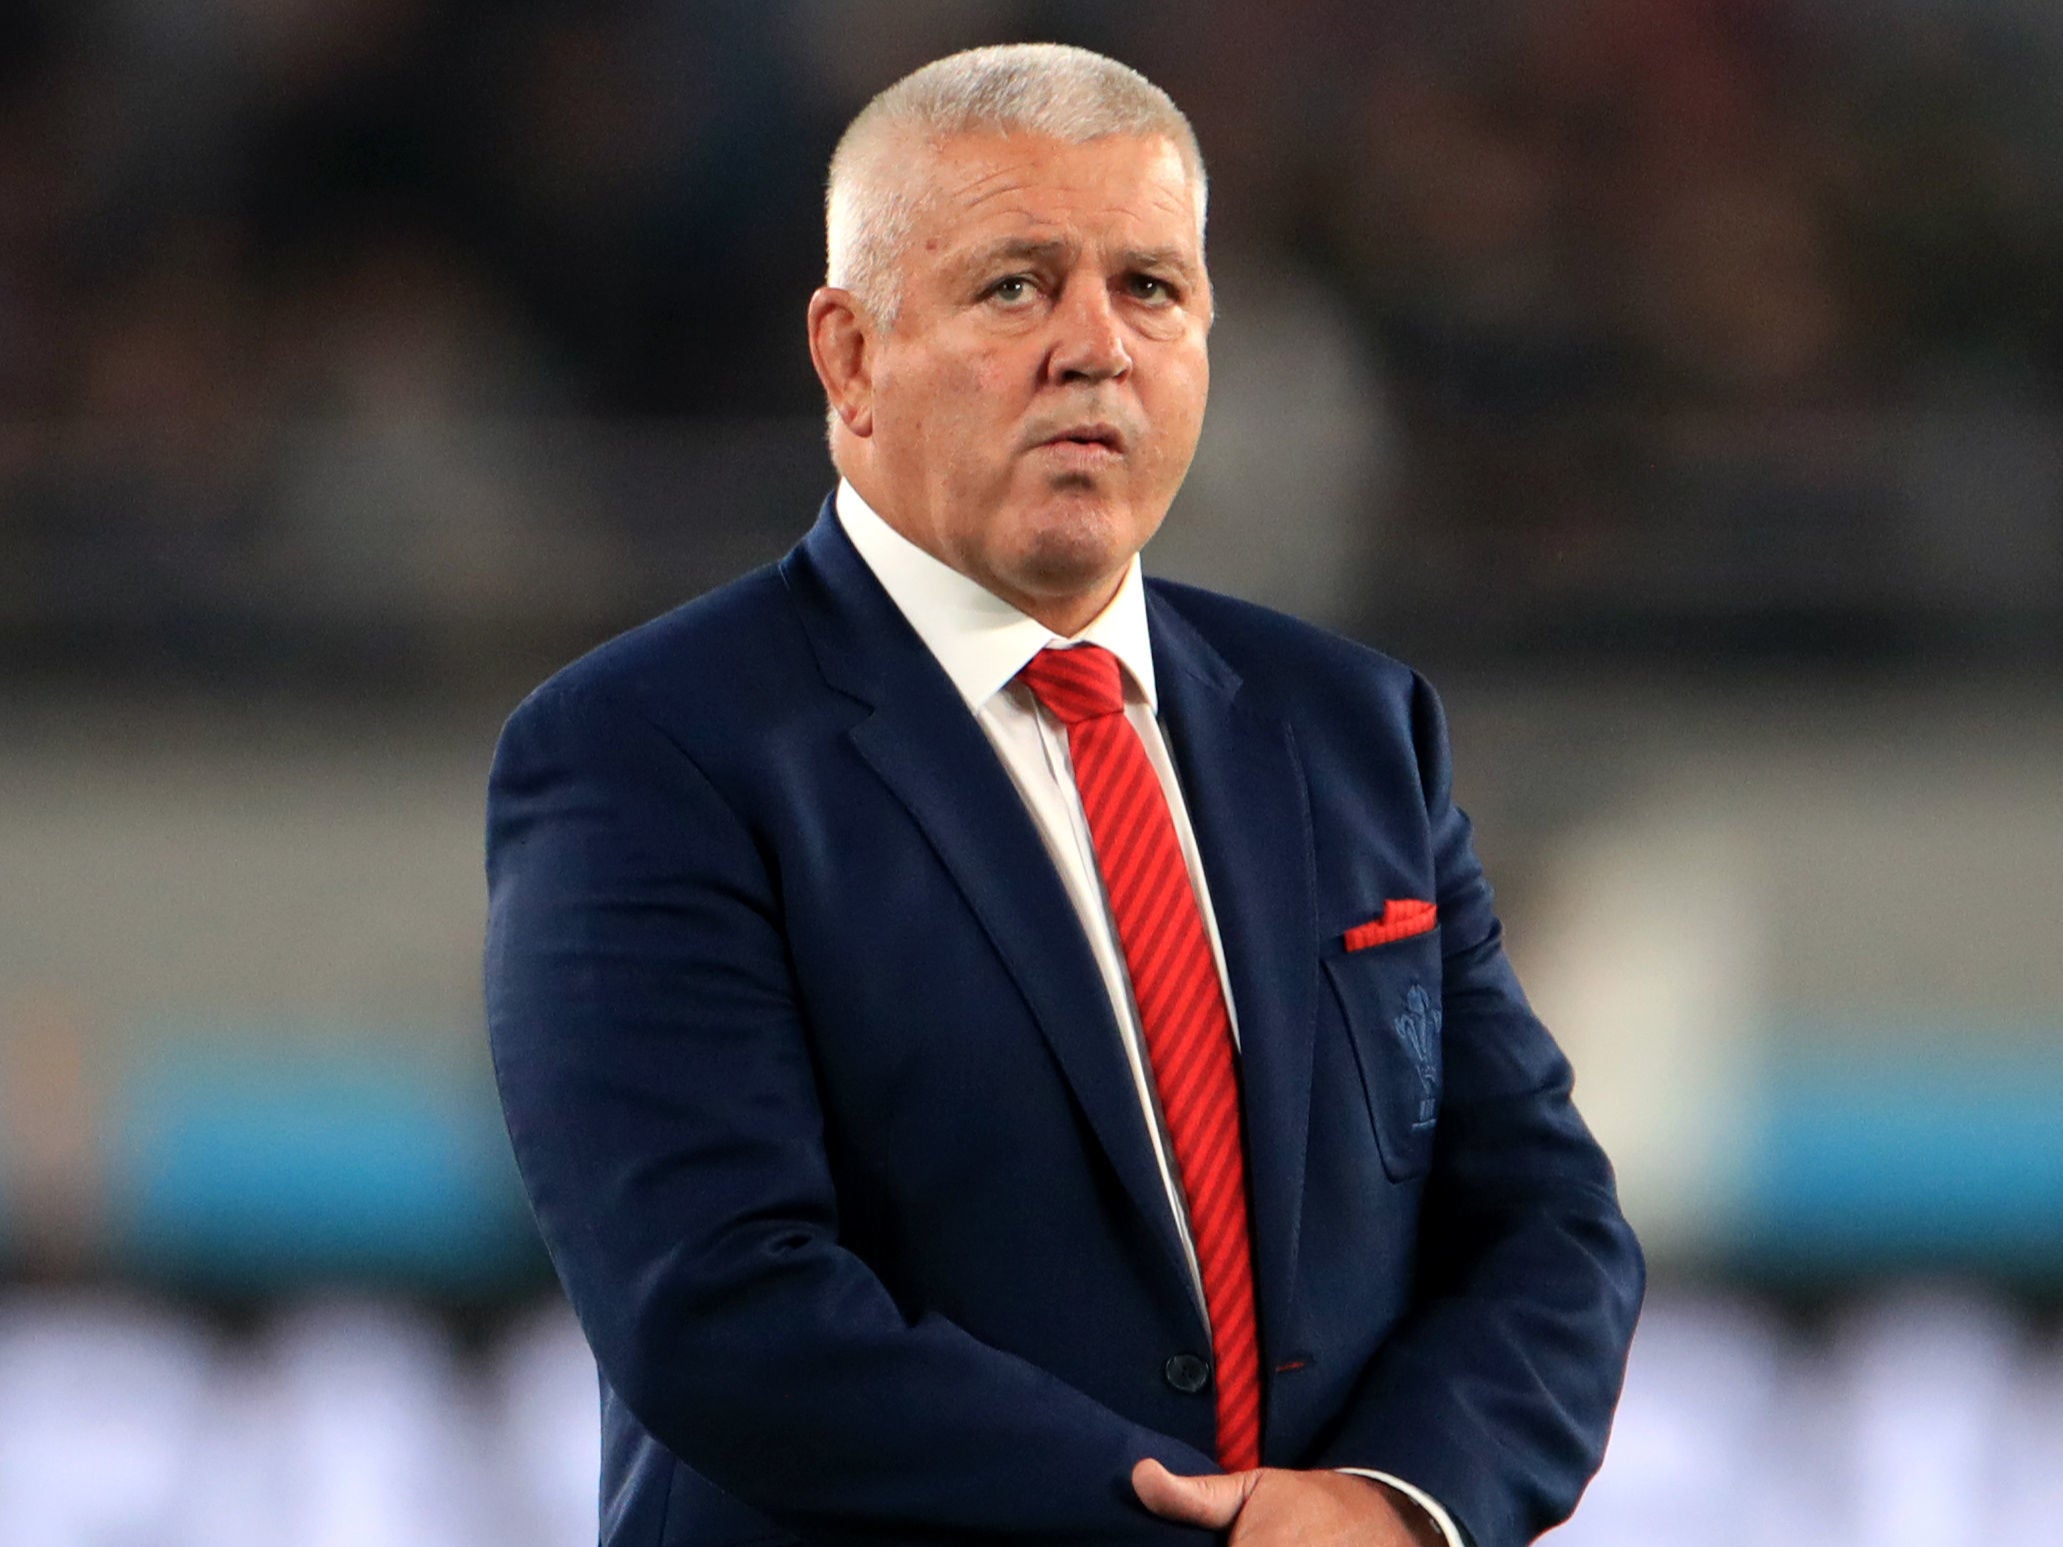 Warren Gatland believes the absence of Premiership players in the first week of the Lions tour could cost them a place in the squad